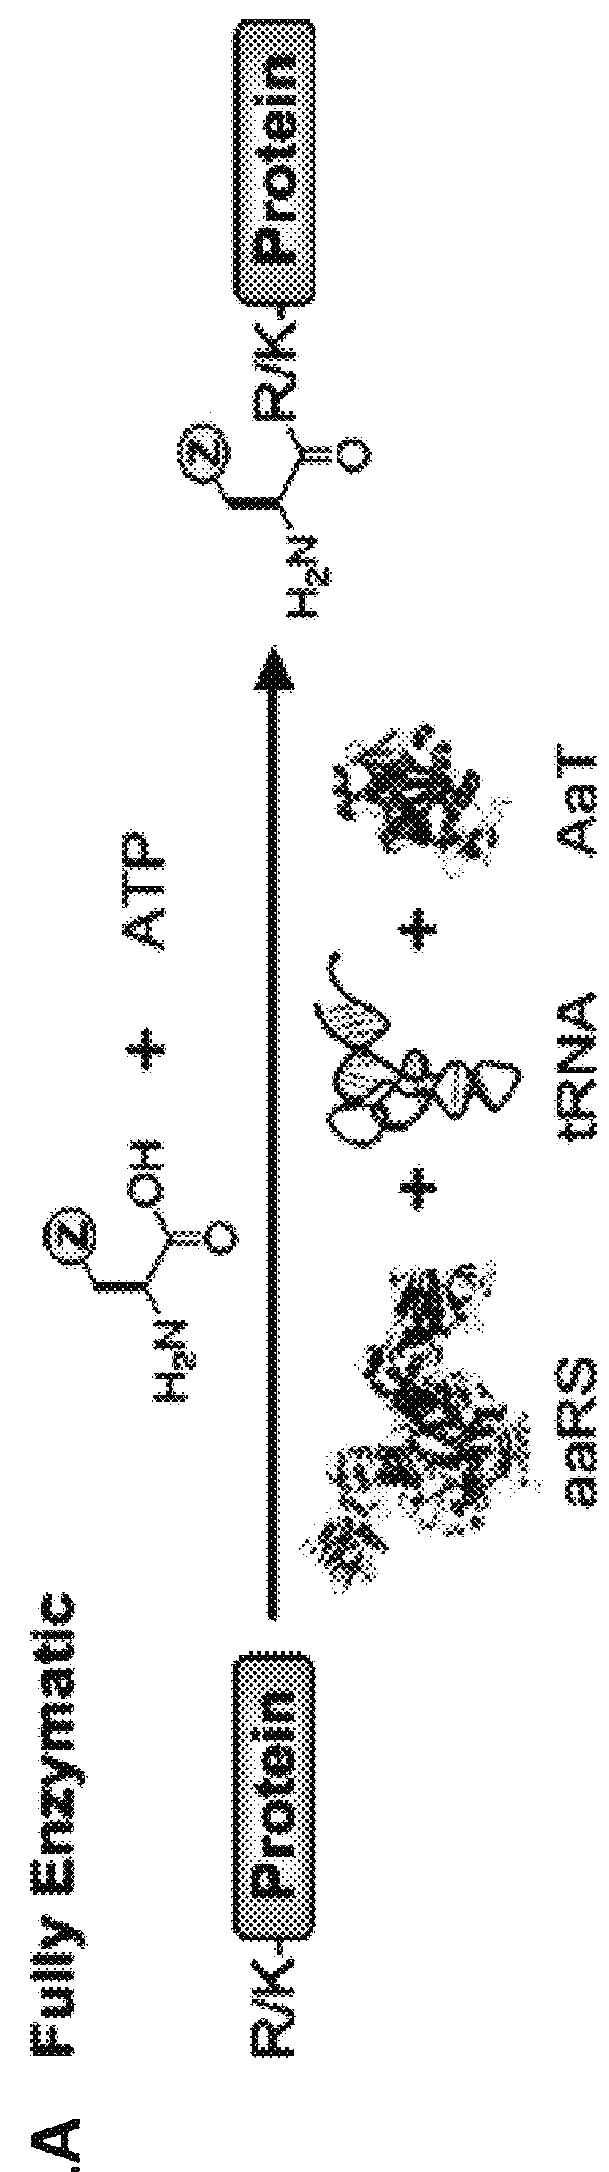 Methods of modifying N-termini of a peptide or protein using transferases